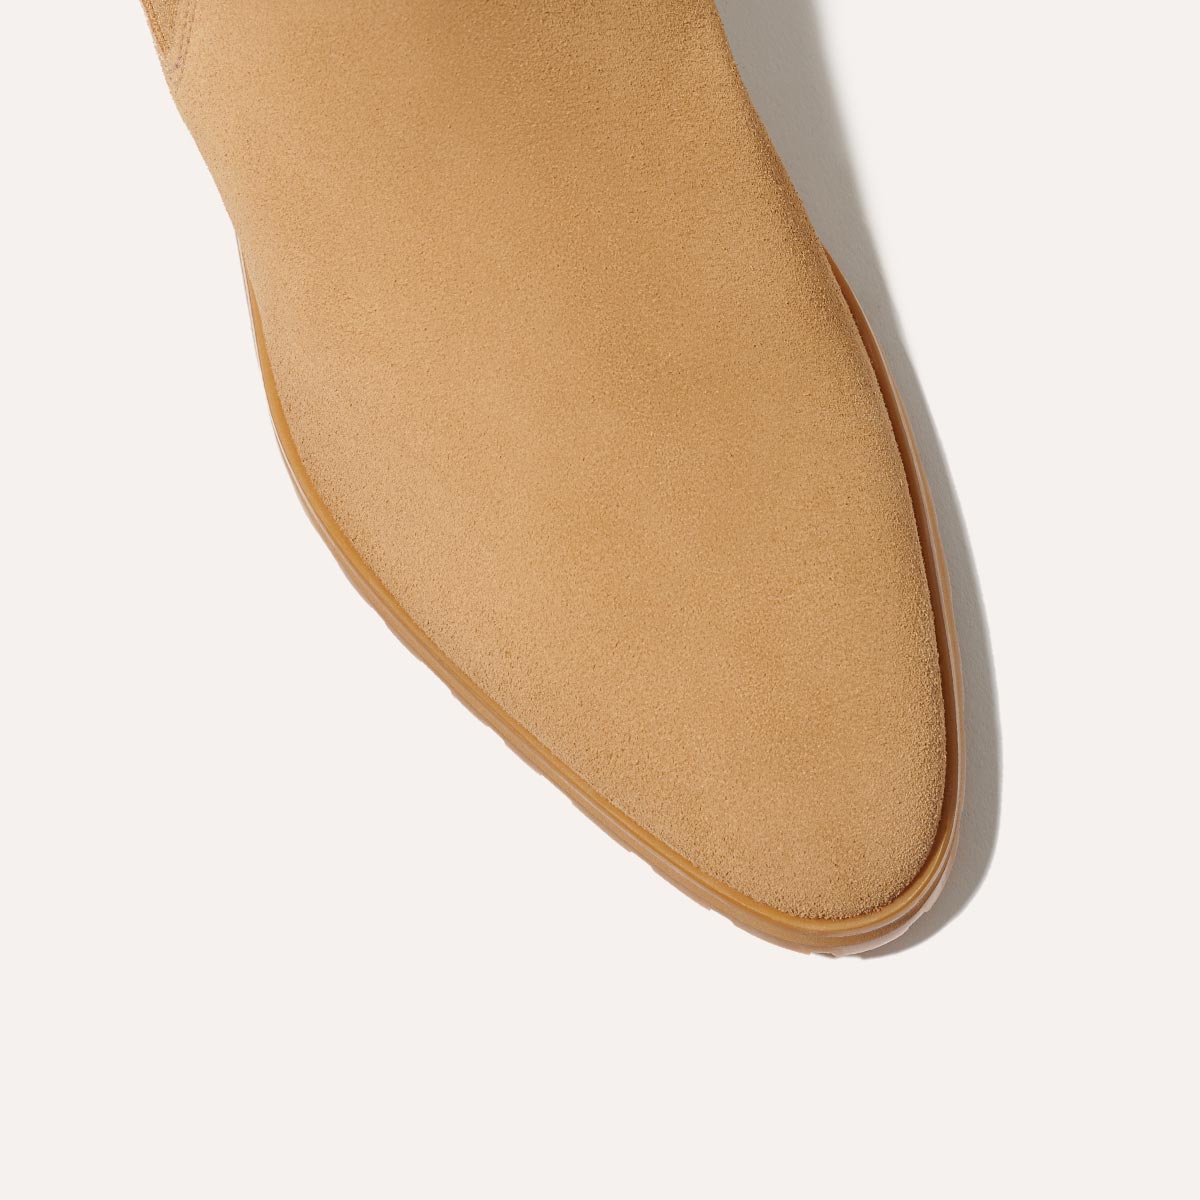 The Chelsea Boot - Sand Suede